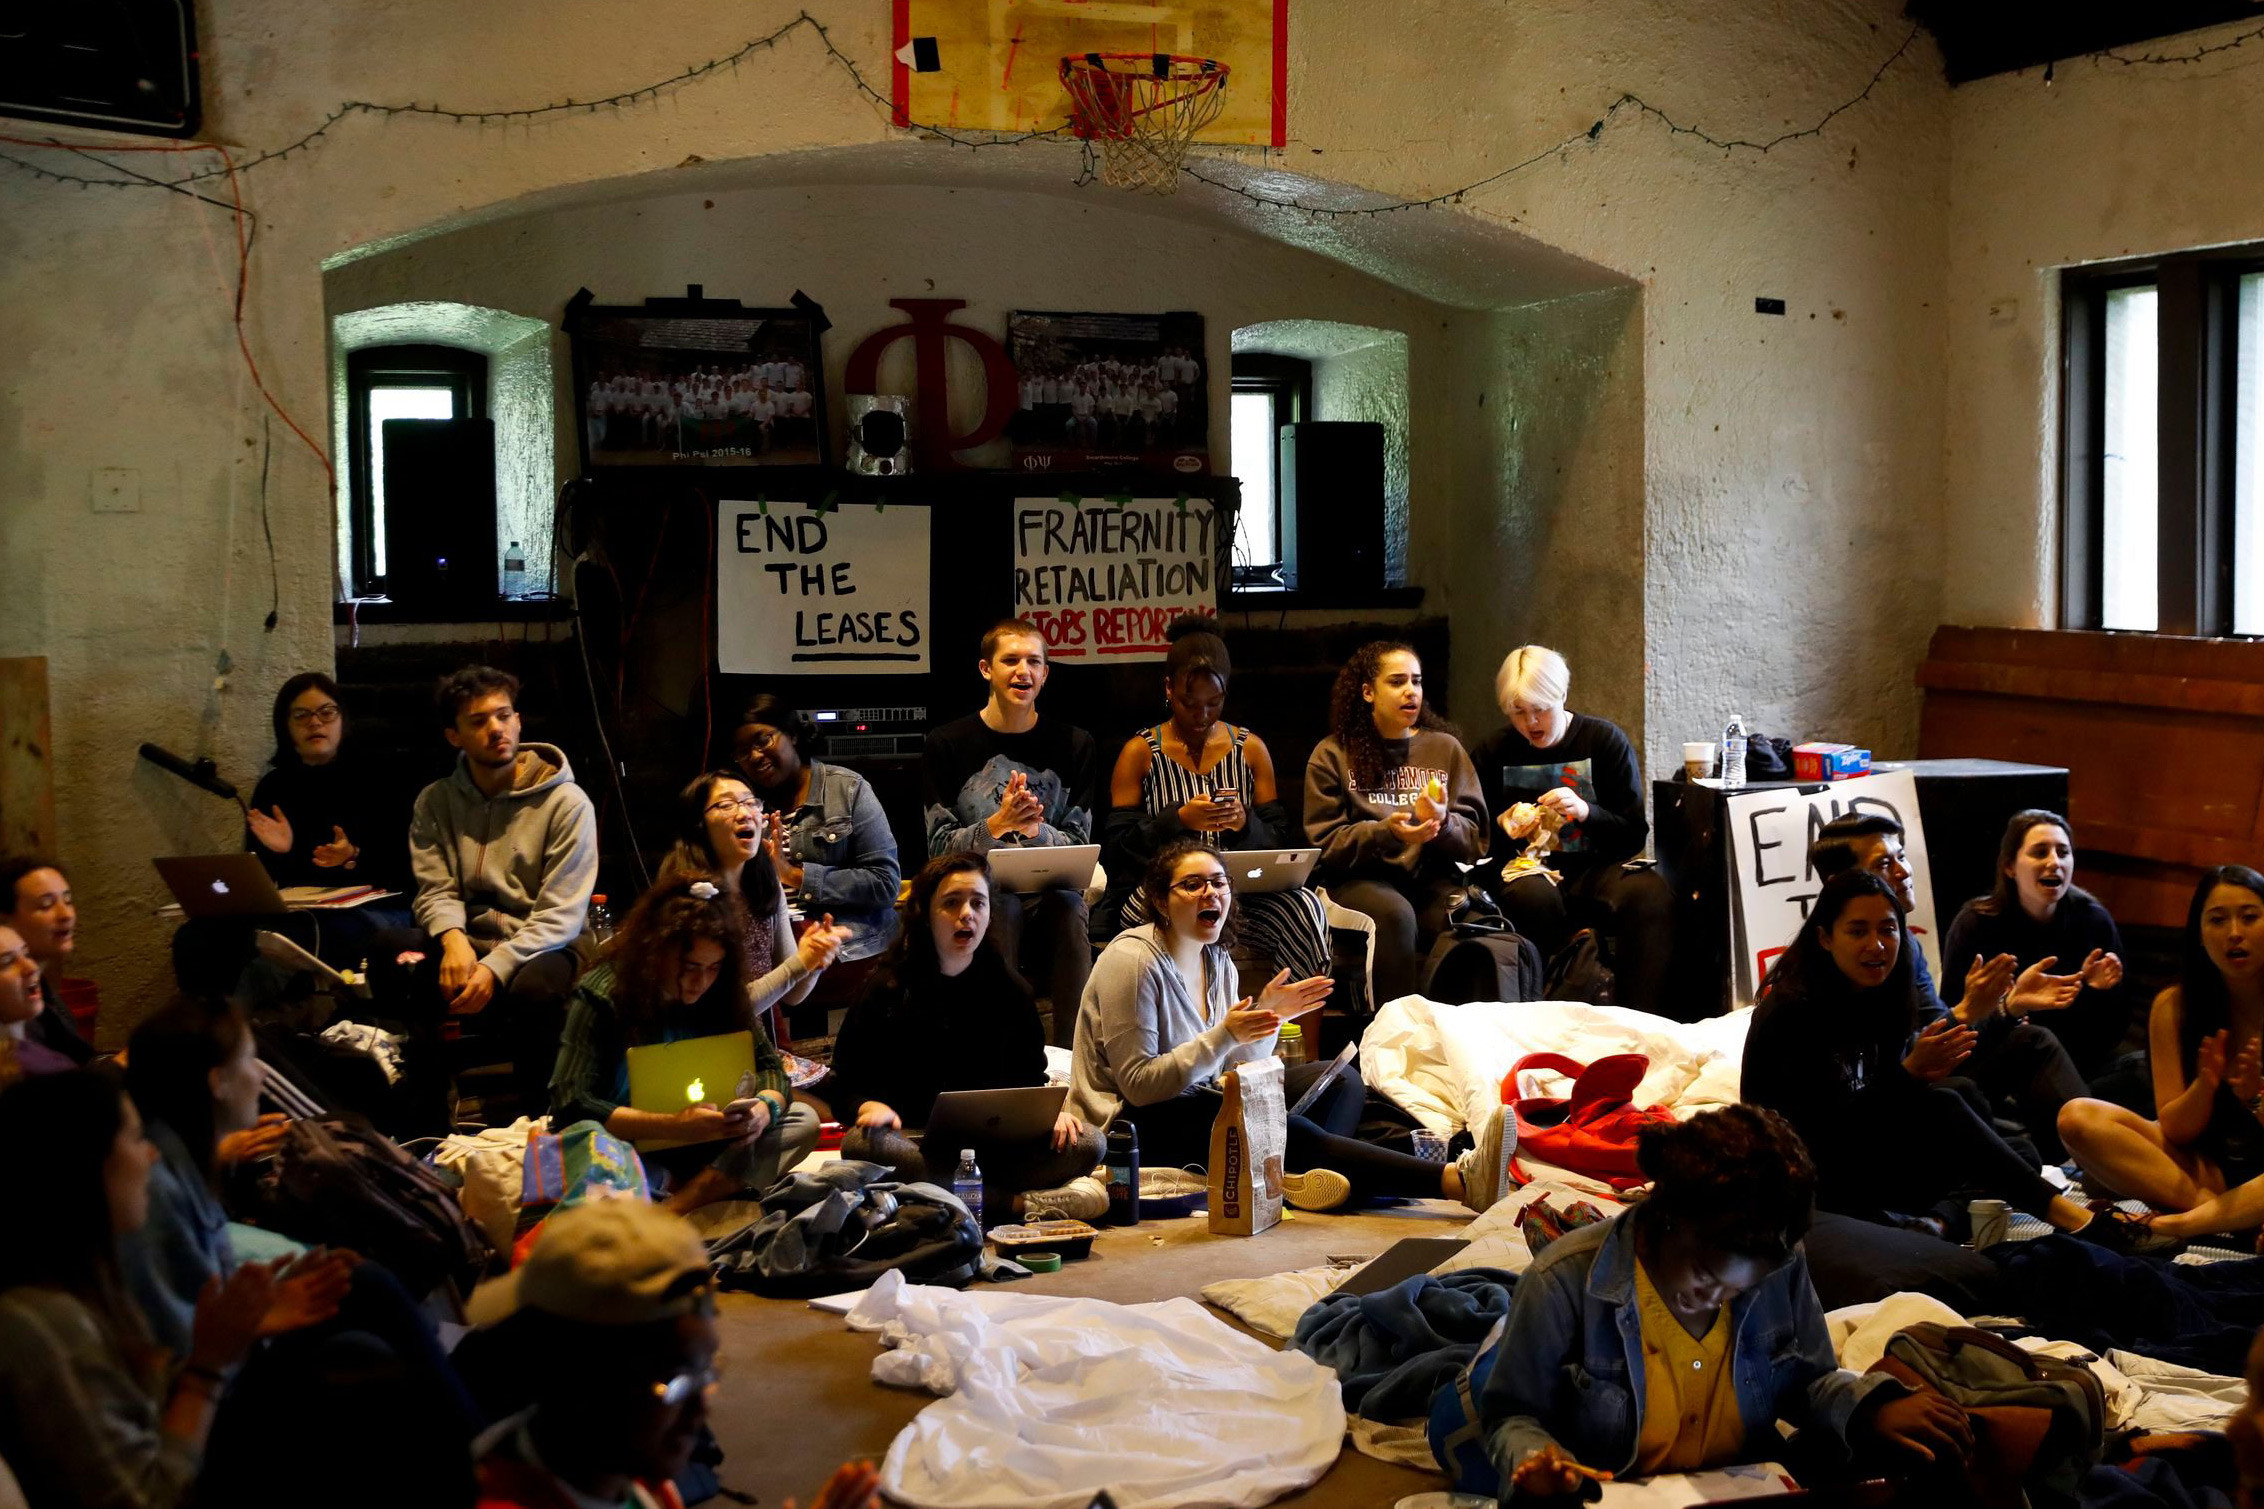 Swarthmore College students sing during a sit-in at the Phi Psi fraternity house, in Swarthmore, Pennsylvania.